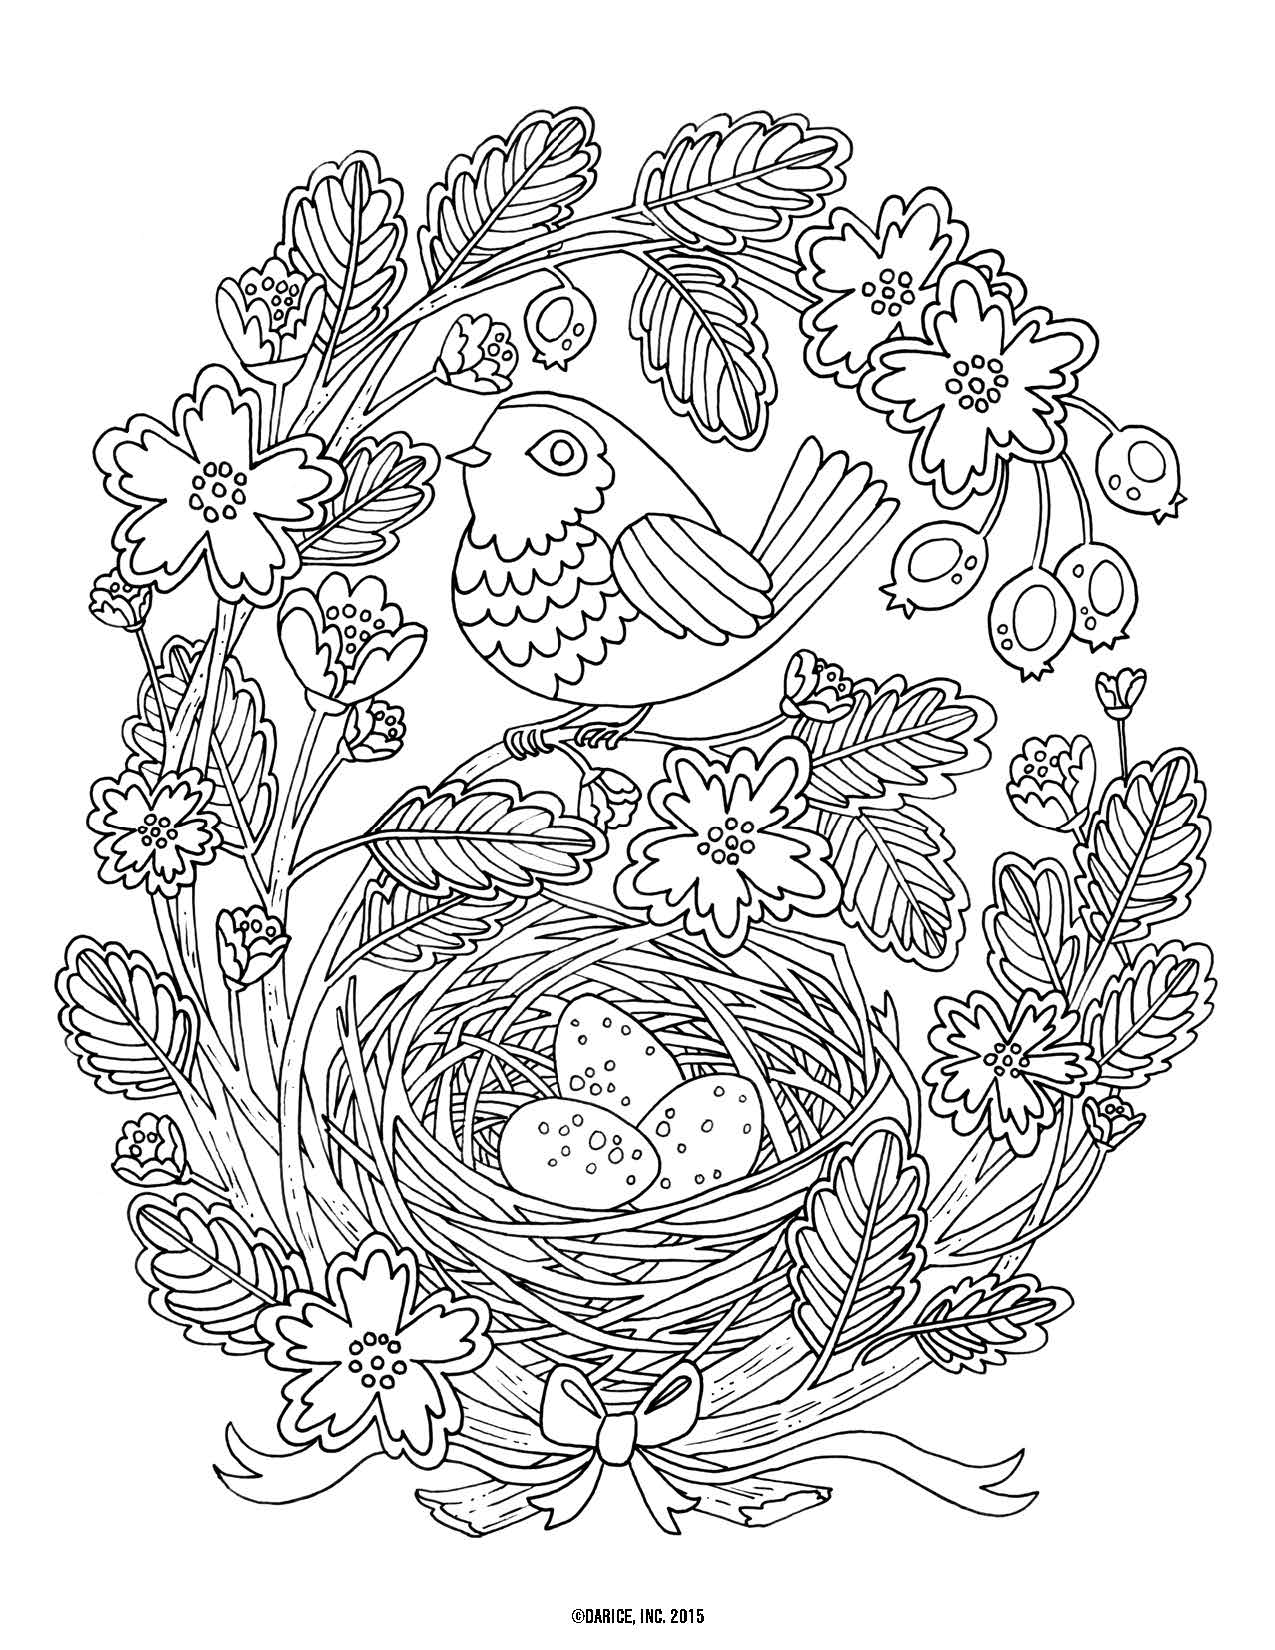 9 Free Printable Adult Coloring Pages | Pat Catan&amp;#039;s Blog - Free Printable Flower Coloring Pages For Adults